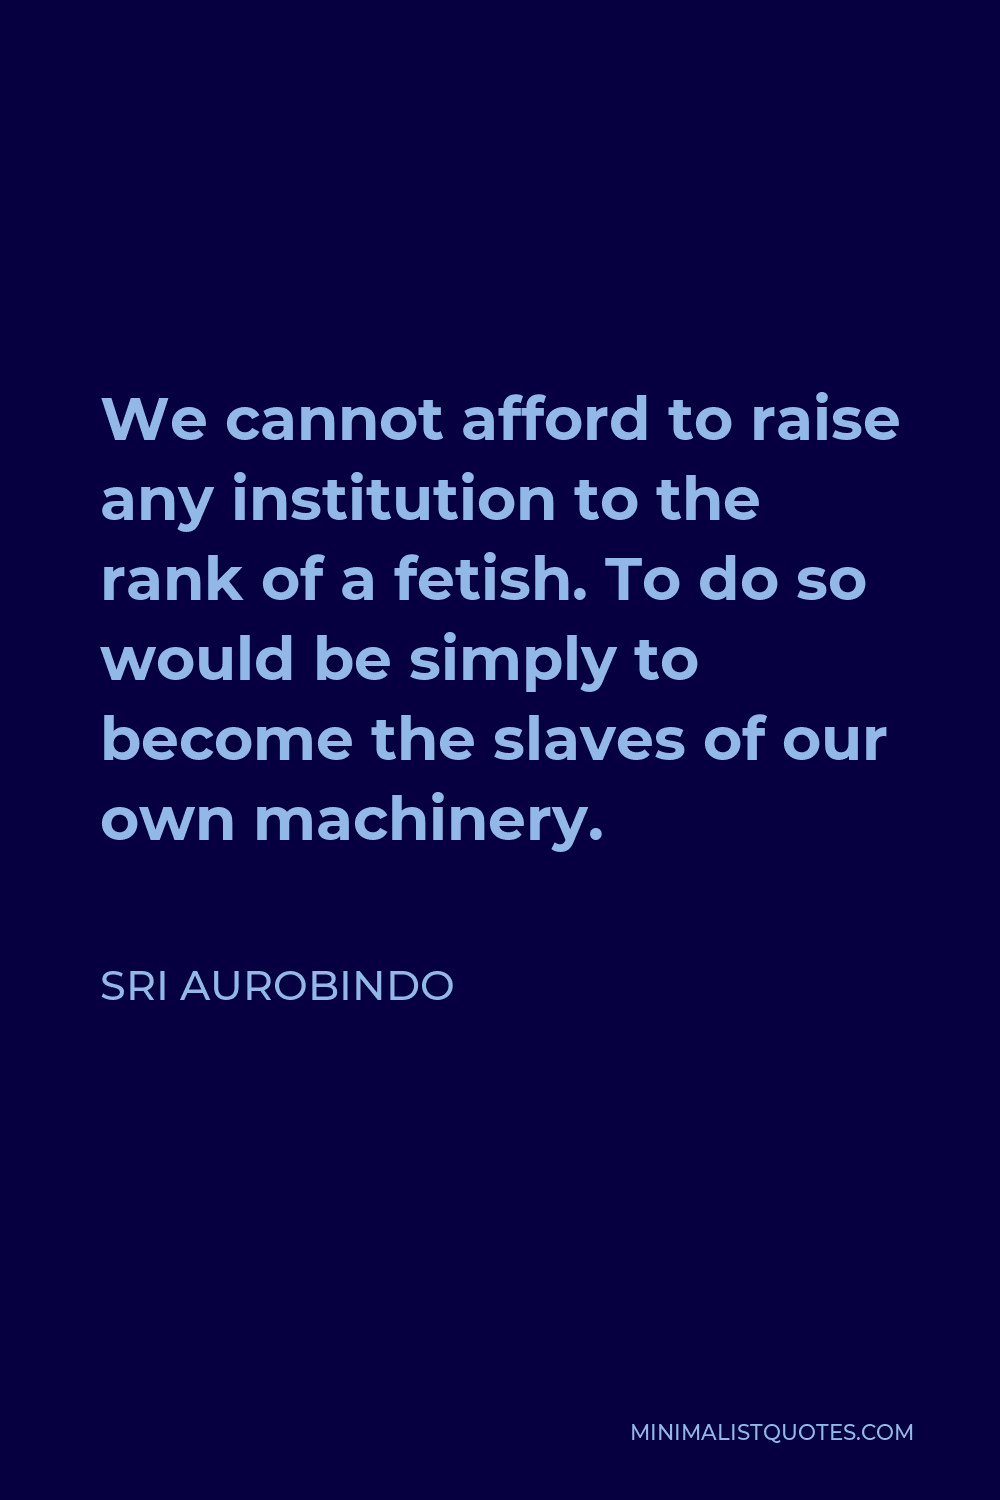 Sri Aurobindo Quote - We cannot afford to raise any institution to the rank of a fetish. To do so would be simply to become the slaves of our own machinery.